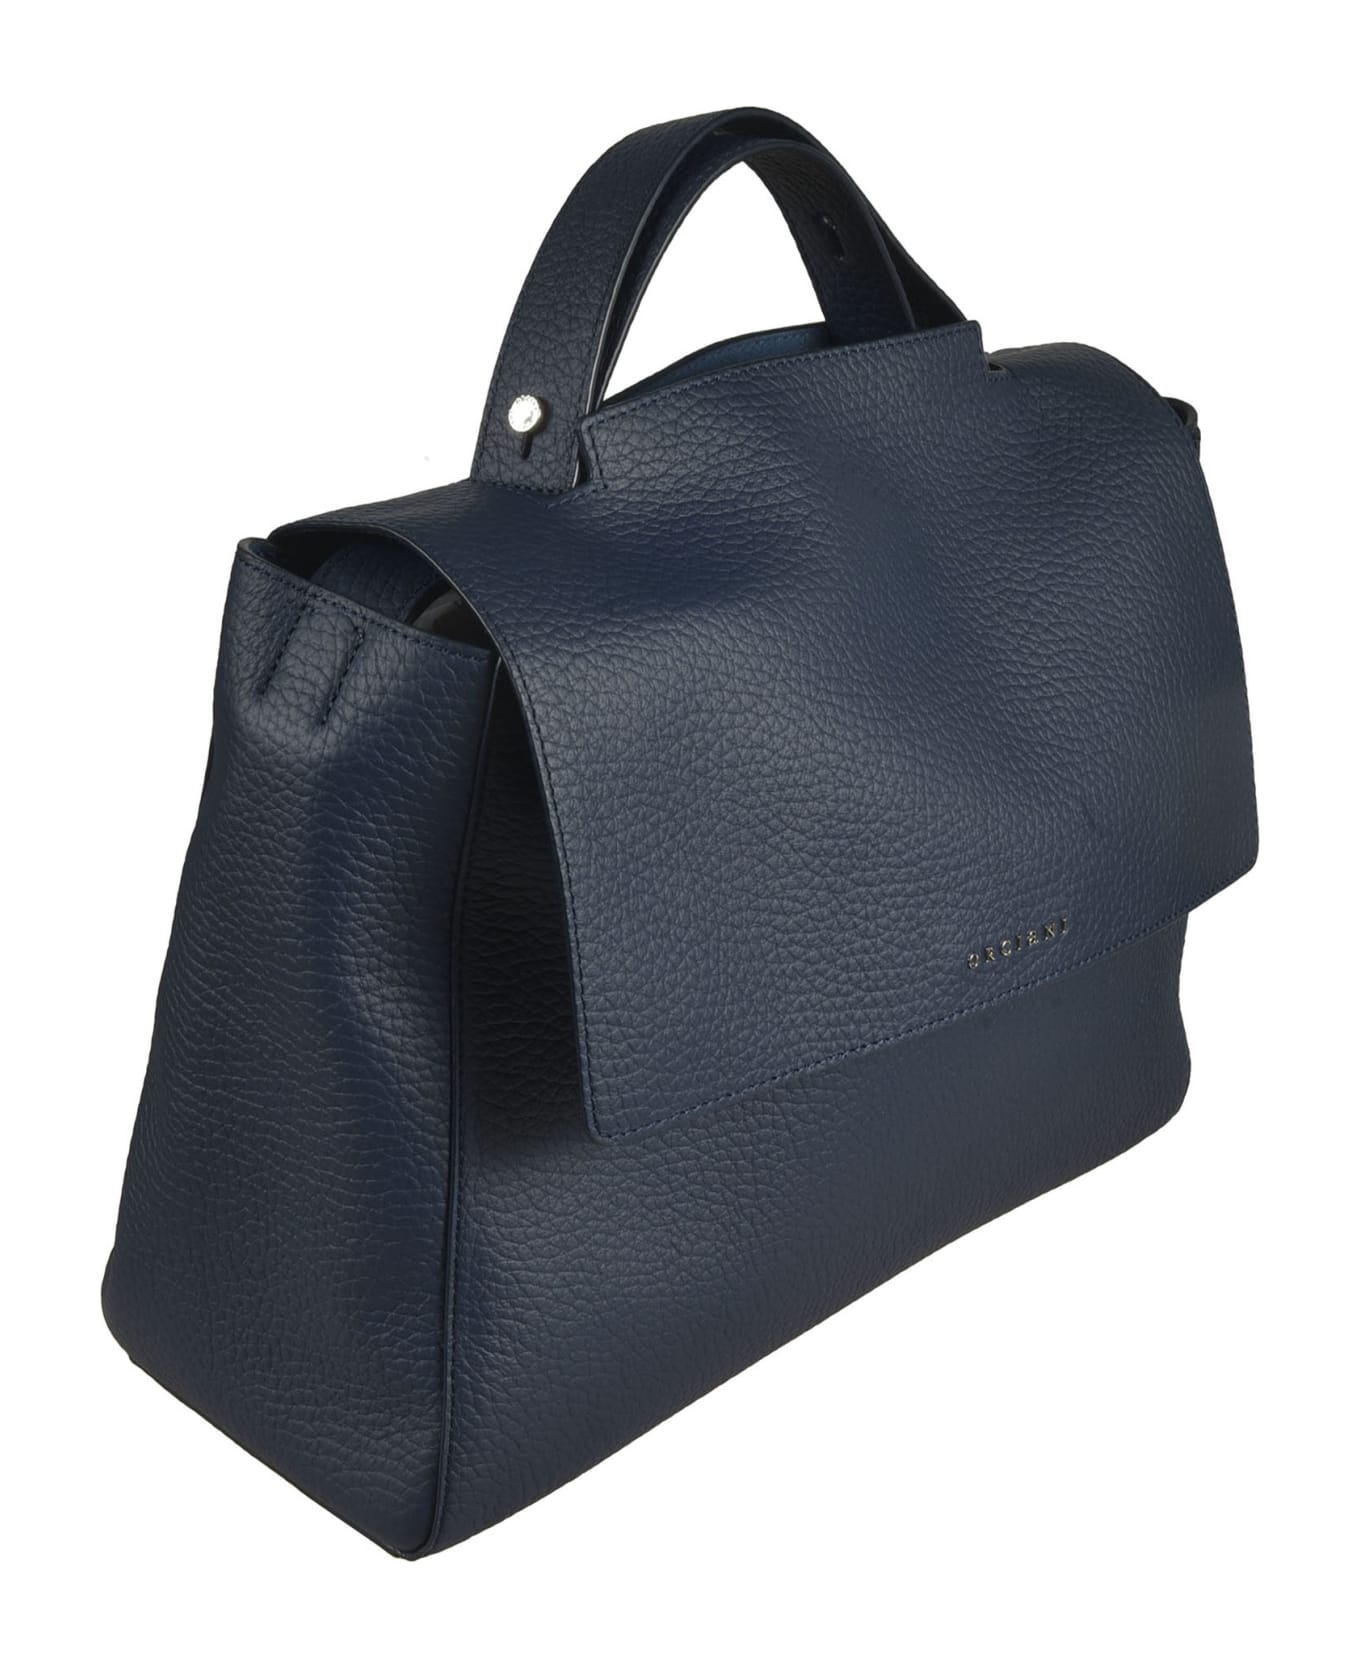 Orciani Logo Flap Tote - Navy